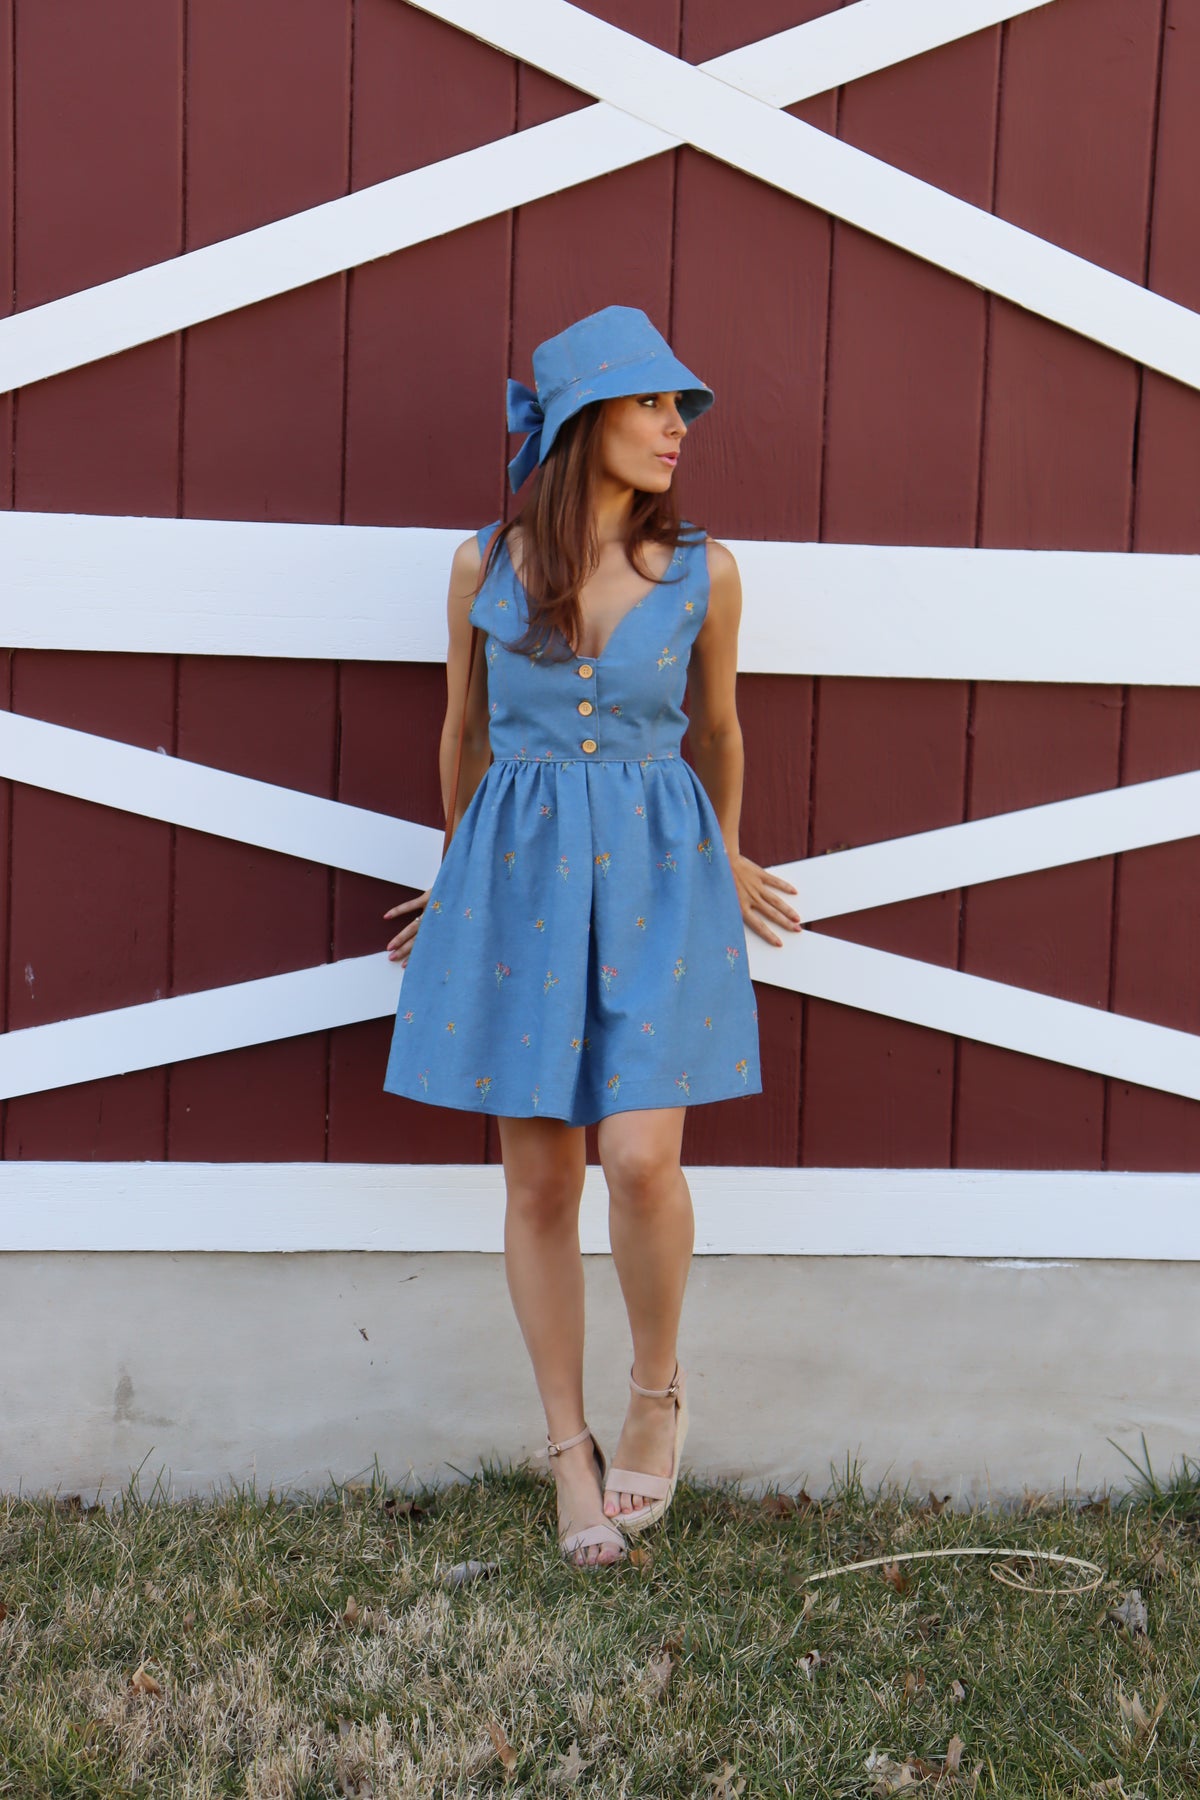 Model in floral embroidered denim dress wearing a floral embroidered denim bucket hat with bow, looking off to the side with hands reaching back against a barn.